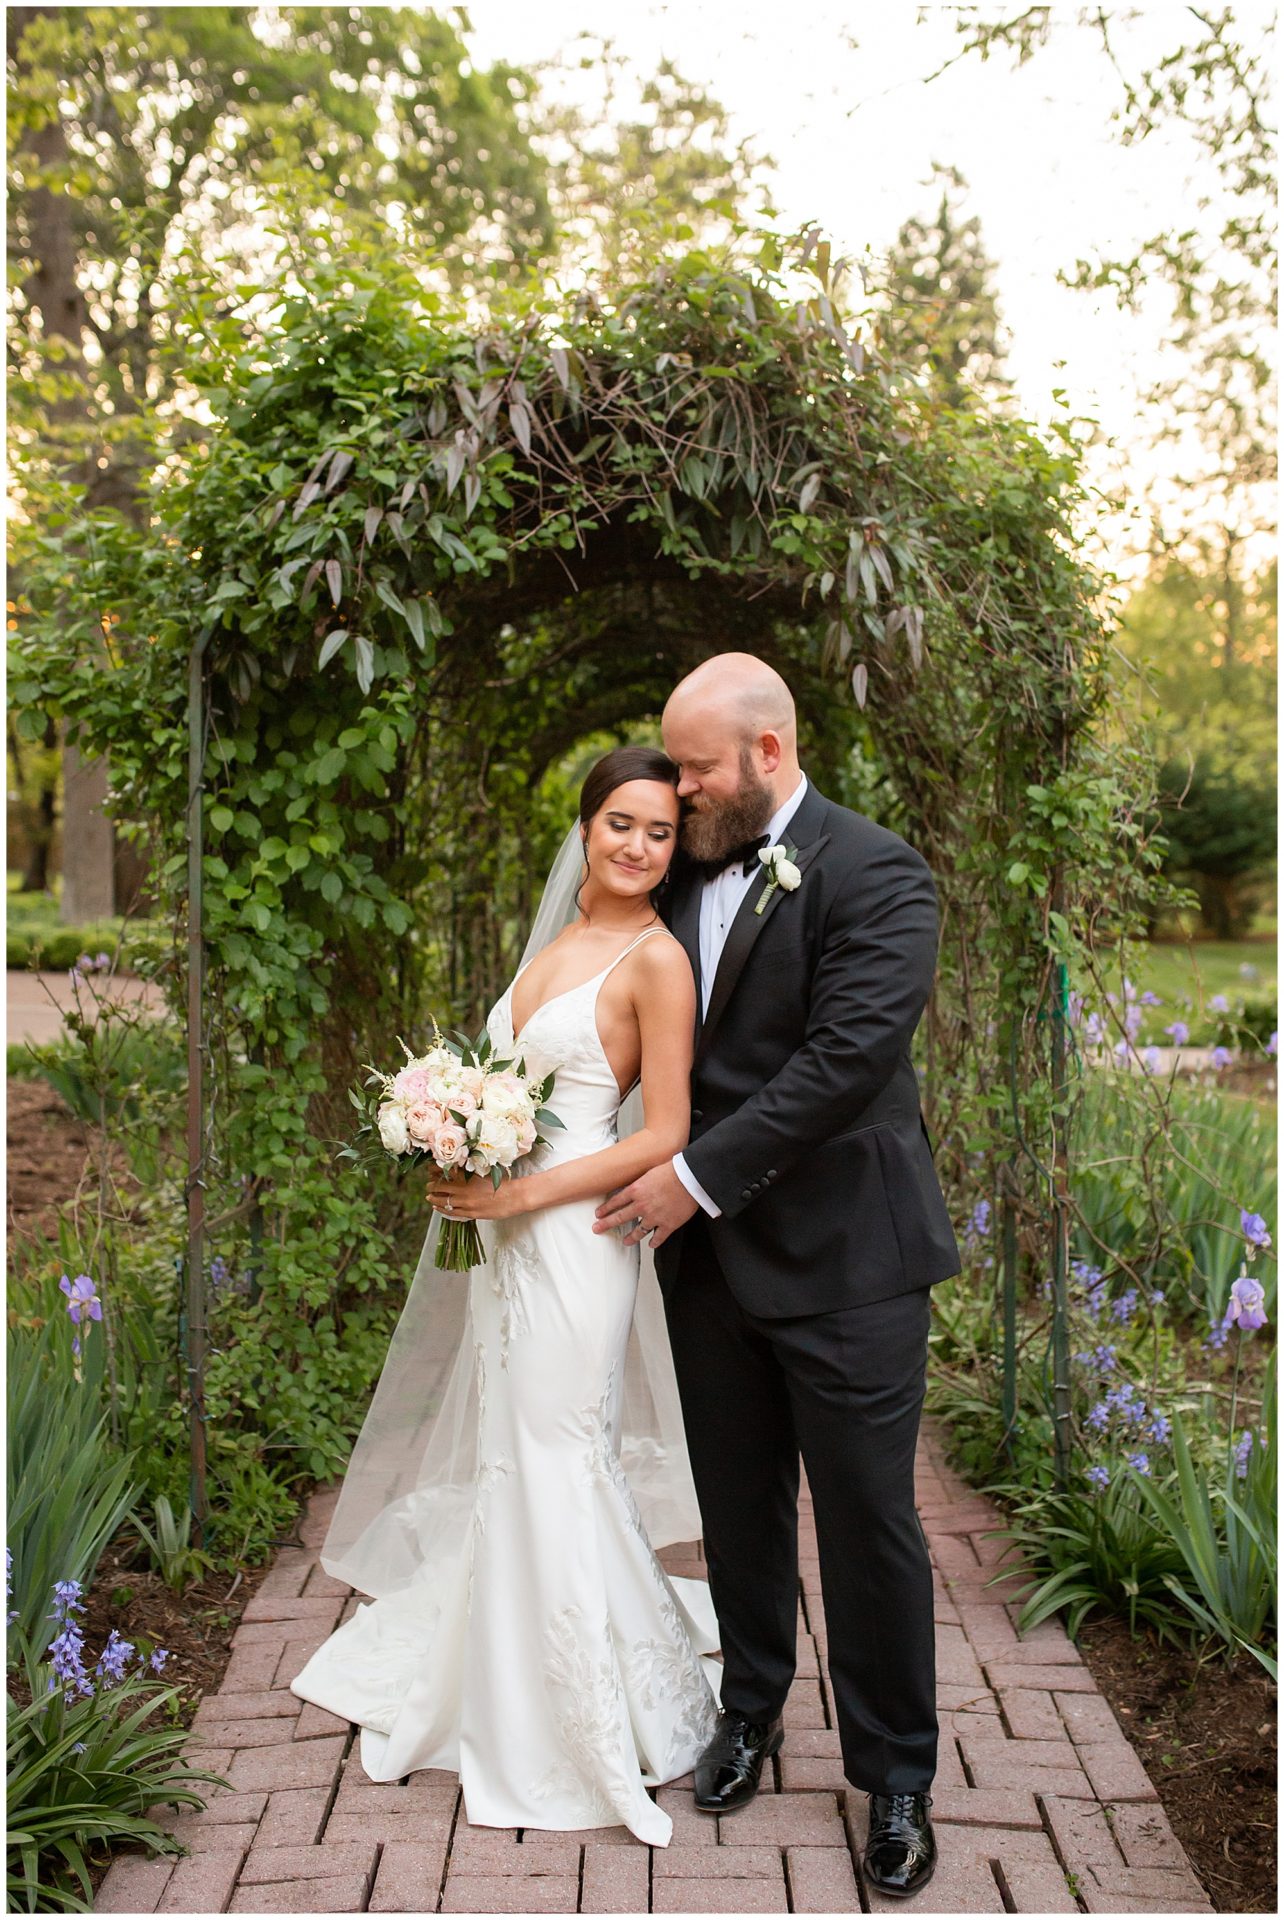 Bride and groom portraits in the ivy archway at Riverwood Mansion by top wedding photographer, Melanie Dunn